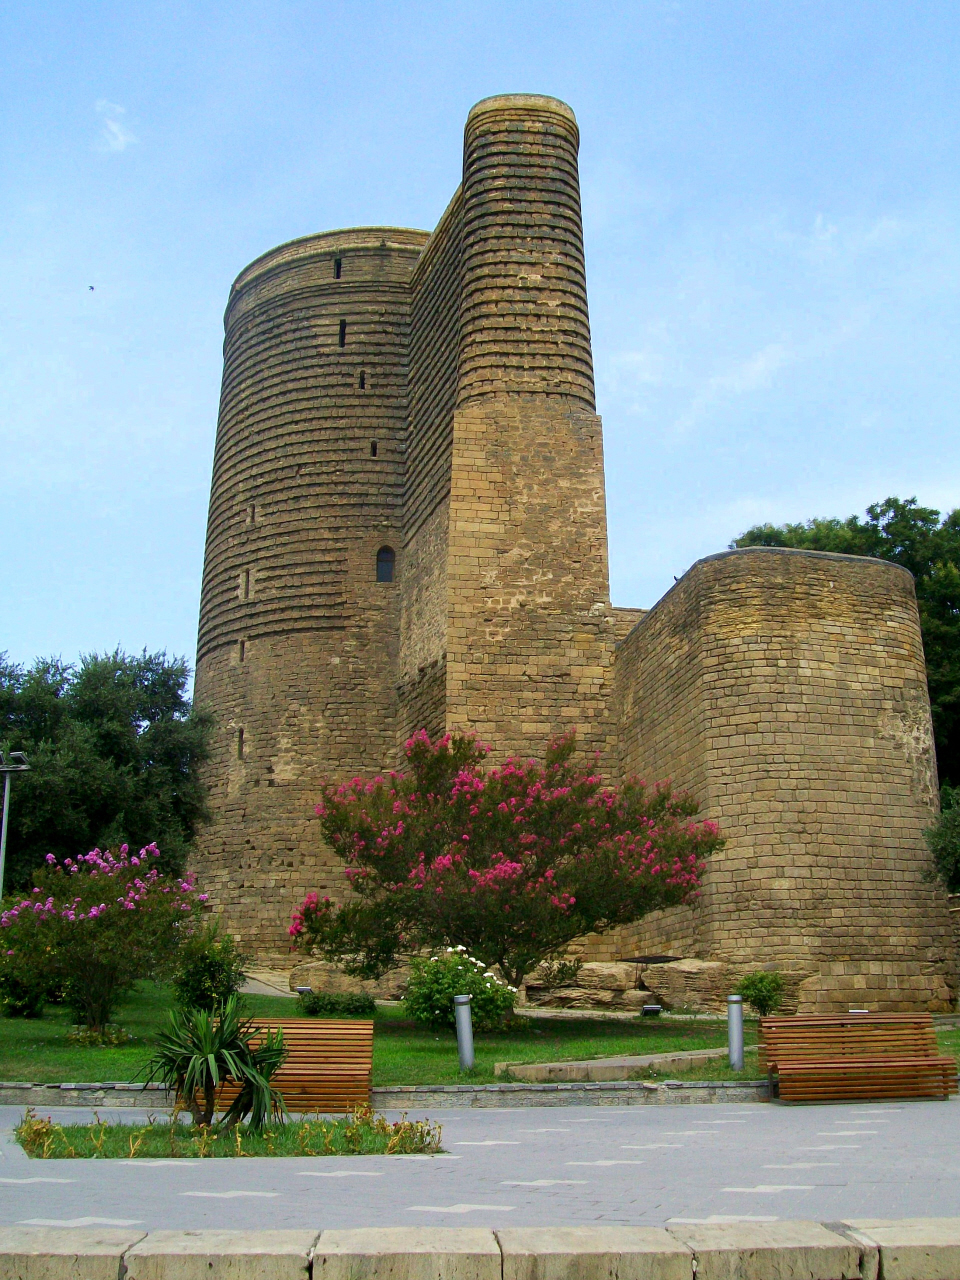 Mystery - Maidens Tower (Belived 12th Cen.) Unknown Purpose - Some Believe Zoroastrian Tower - Bacu, Azerbaijan